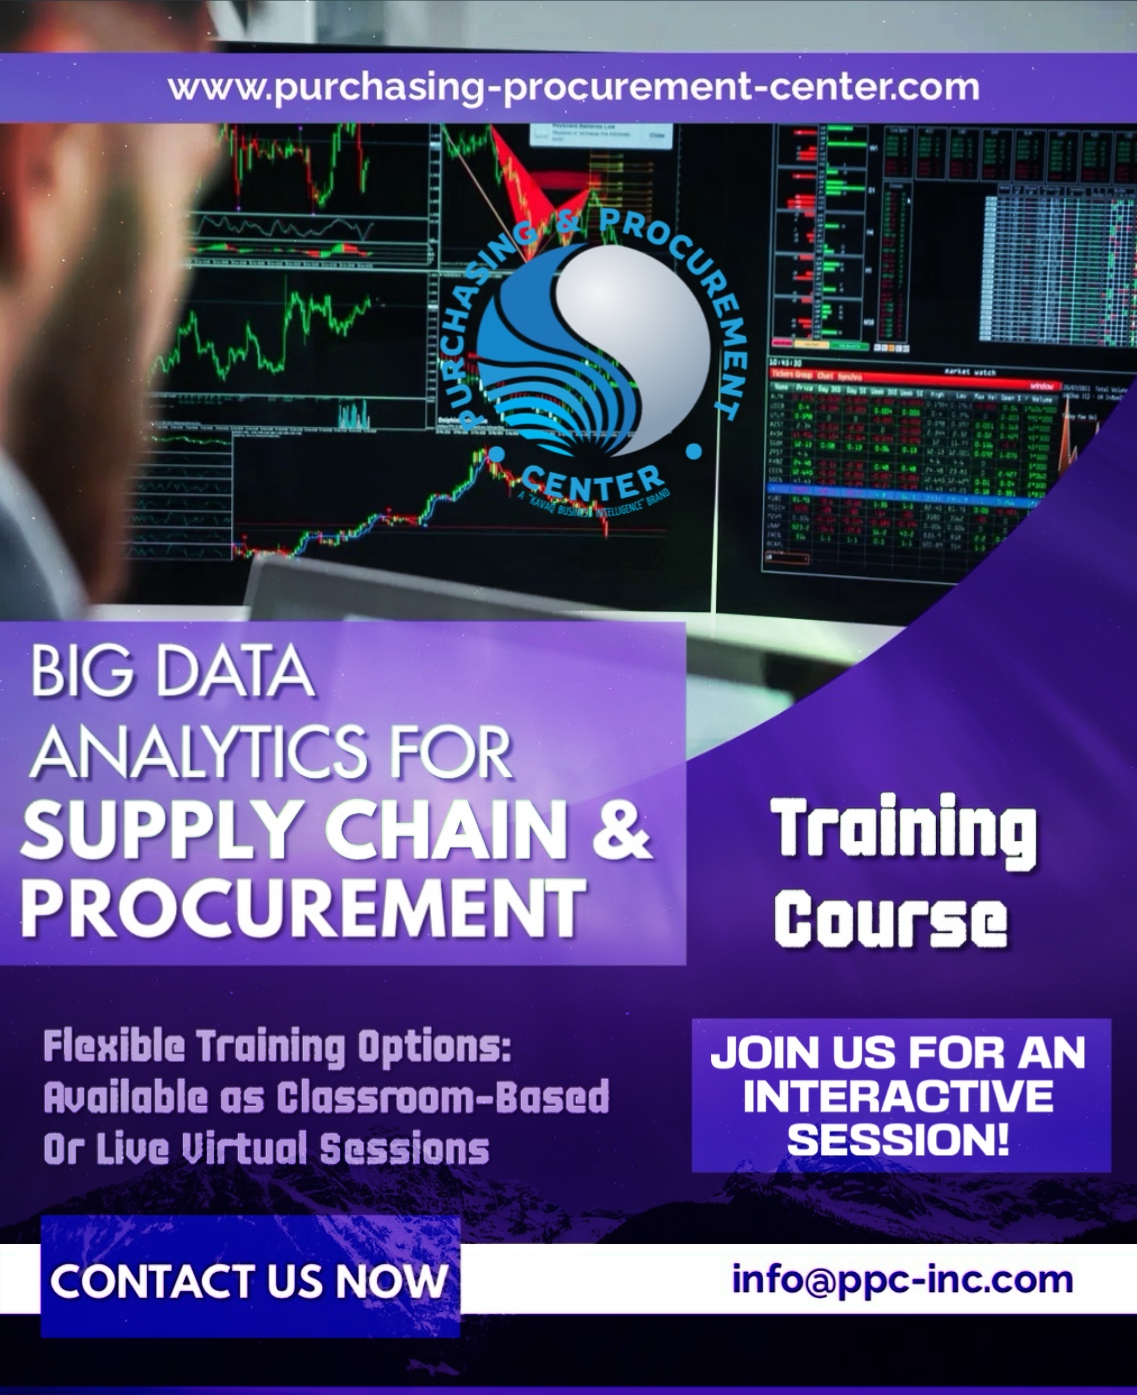 Get All the Required Knowledge to Understand the Fundamentals of Big Data Analytics. With Practical Examples to Make the Concepts Clearer & Pragmatic Pointers! 